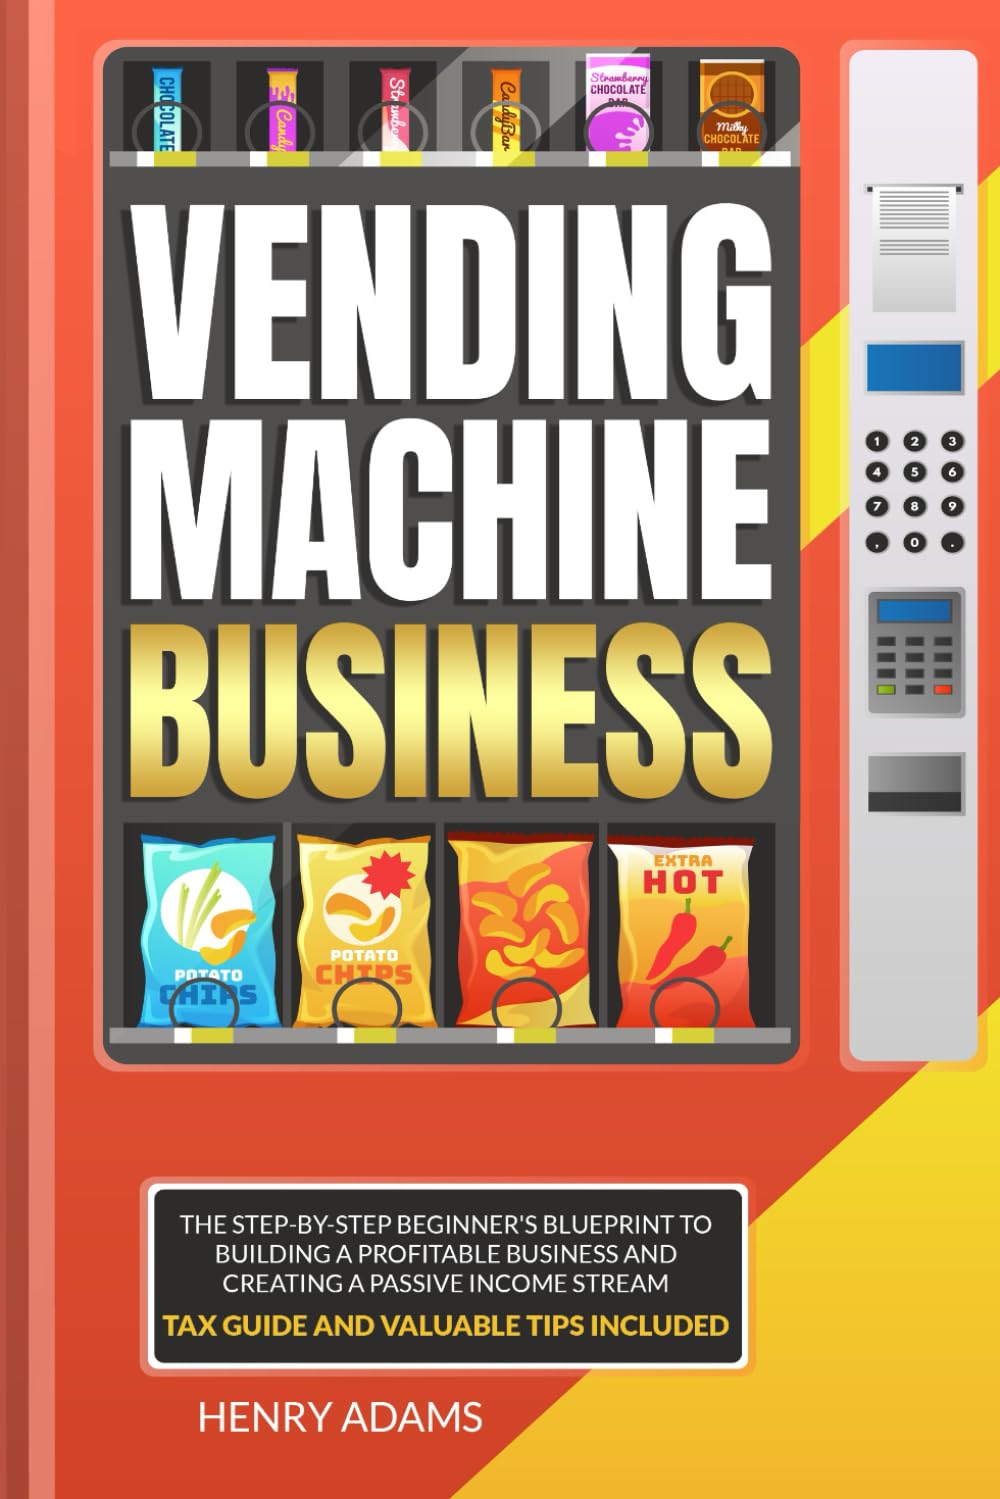 VENDING MACHINE BUSINESS: Vending Machine Business: The Step-by-Step Beginner's Blueprint to Building a Profitable Business and Creating a Passive Income Stream | Tax Guide and Valuable Tips Included